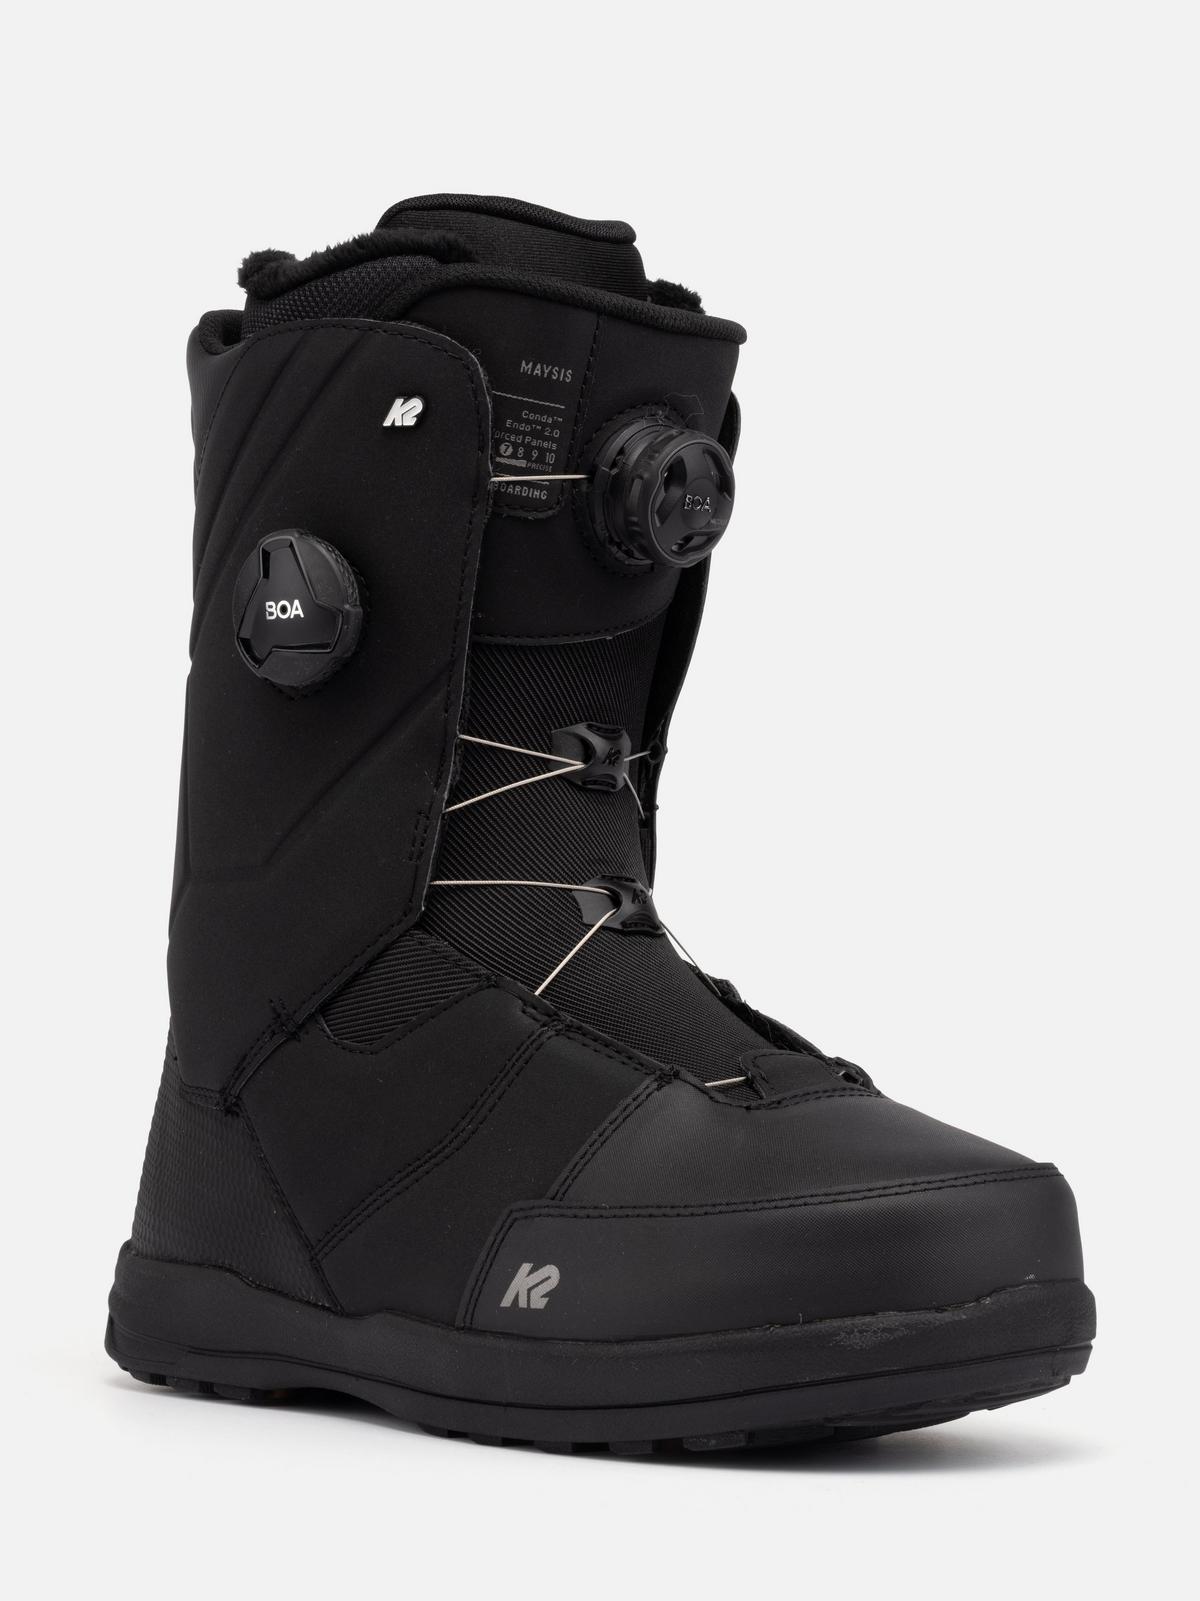 K2 Maysis Wide Snowboard Boot 2022 | K2 Skis and K2 Snowboarding